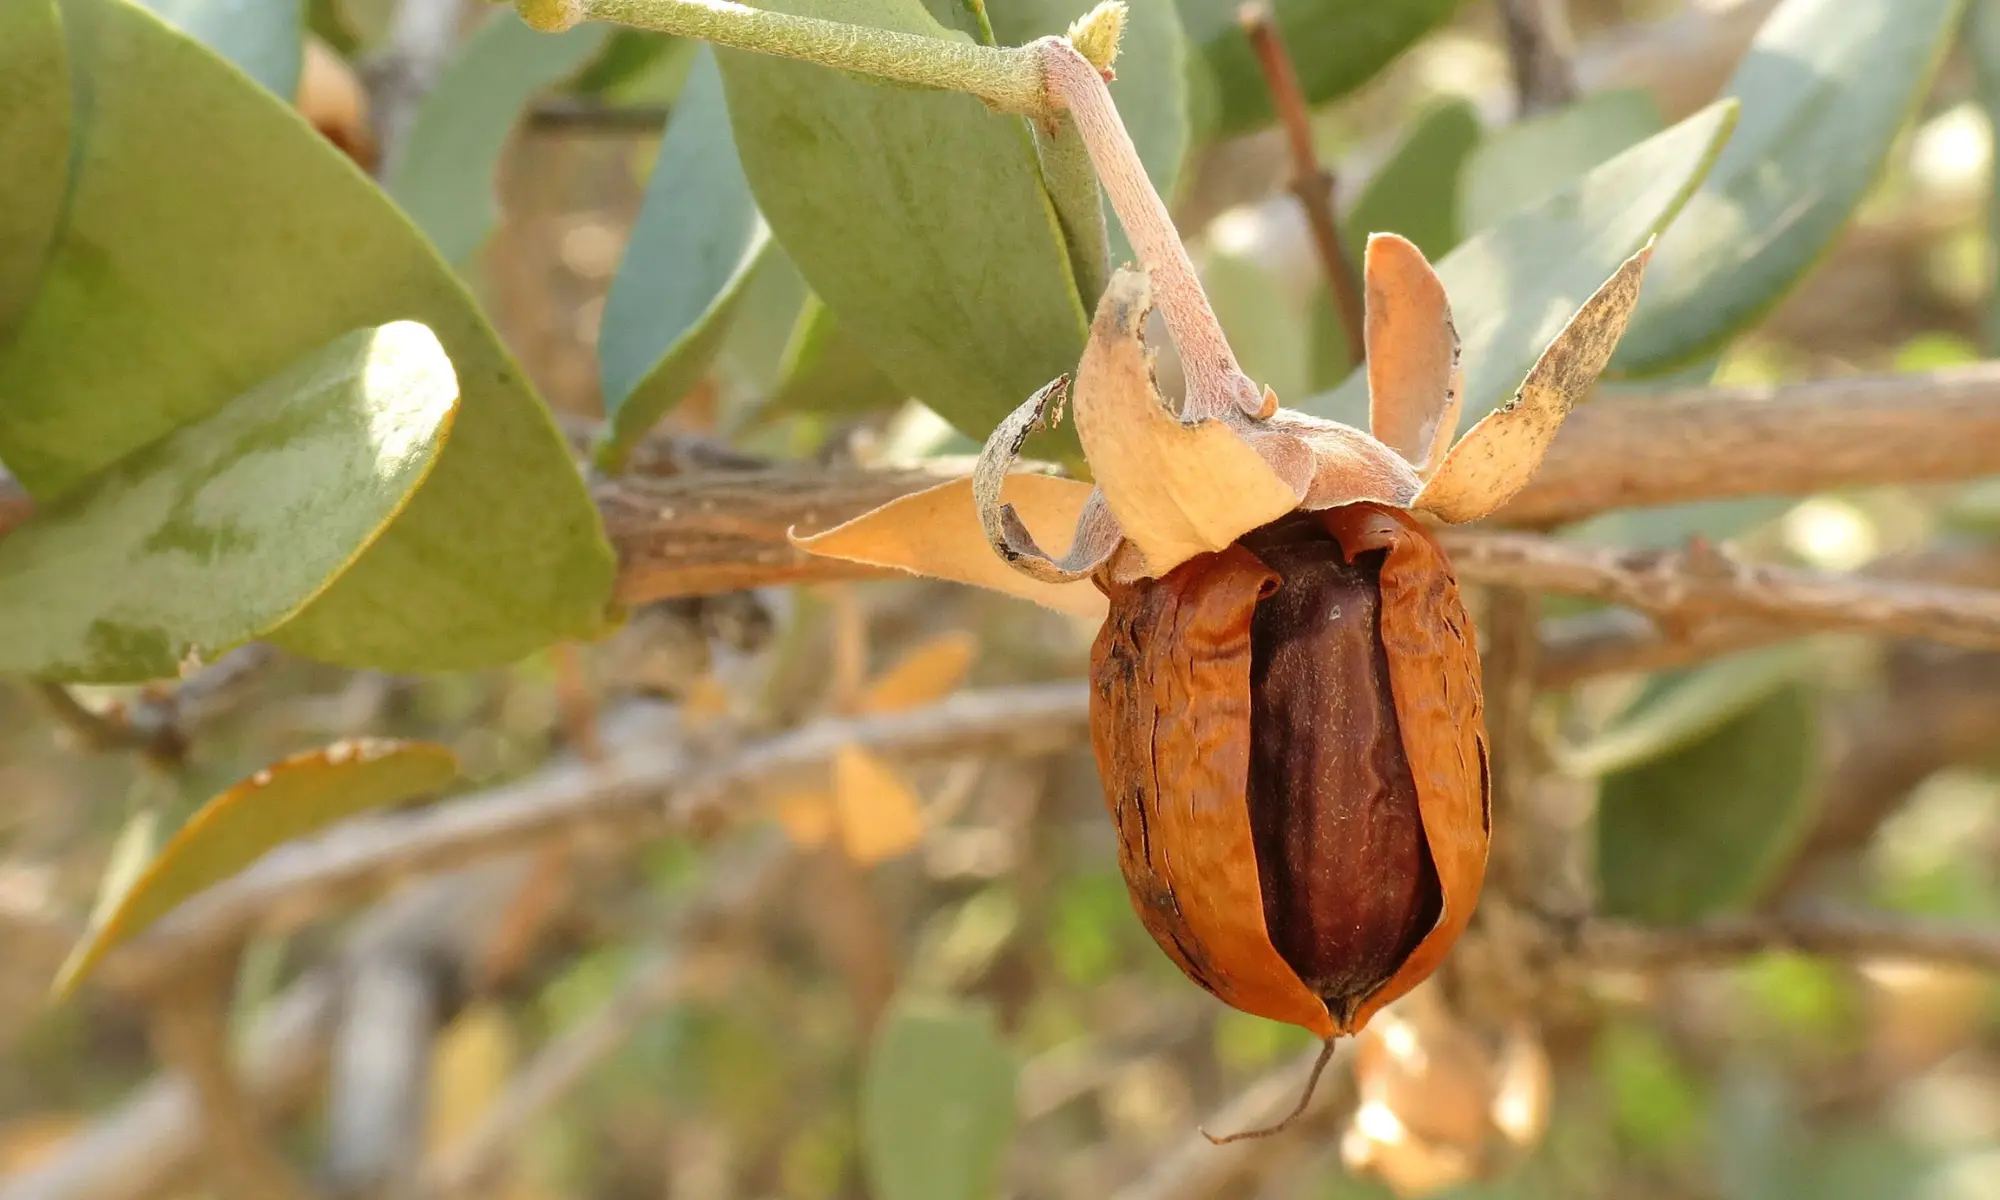 A jojoba nut hanging from a tree.